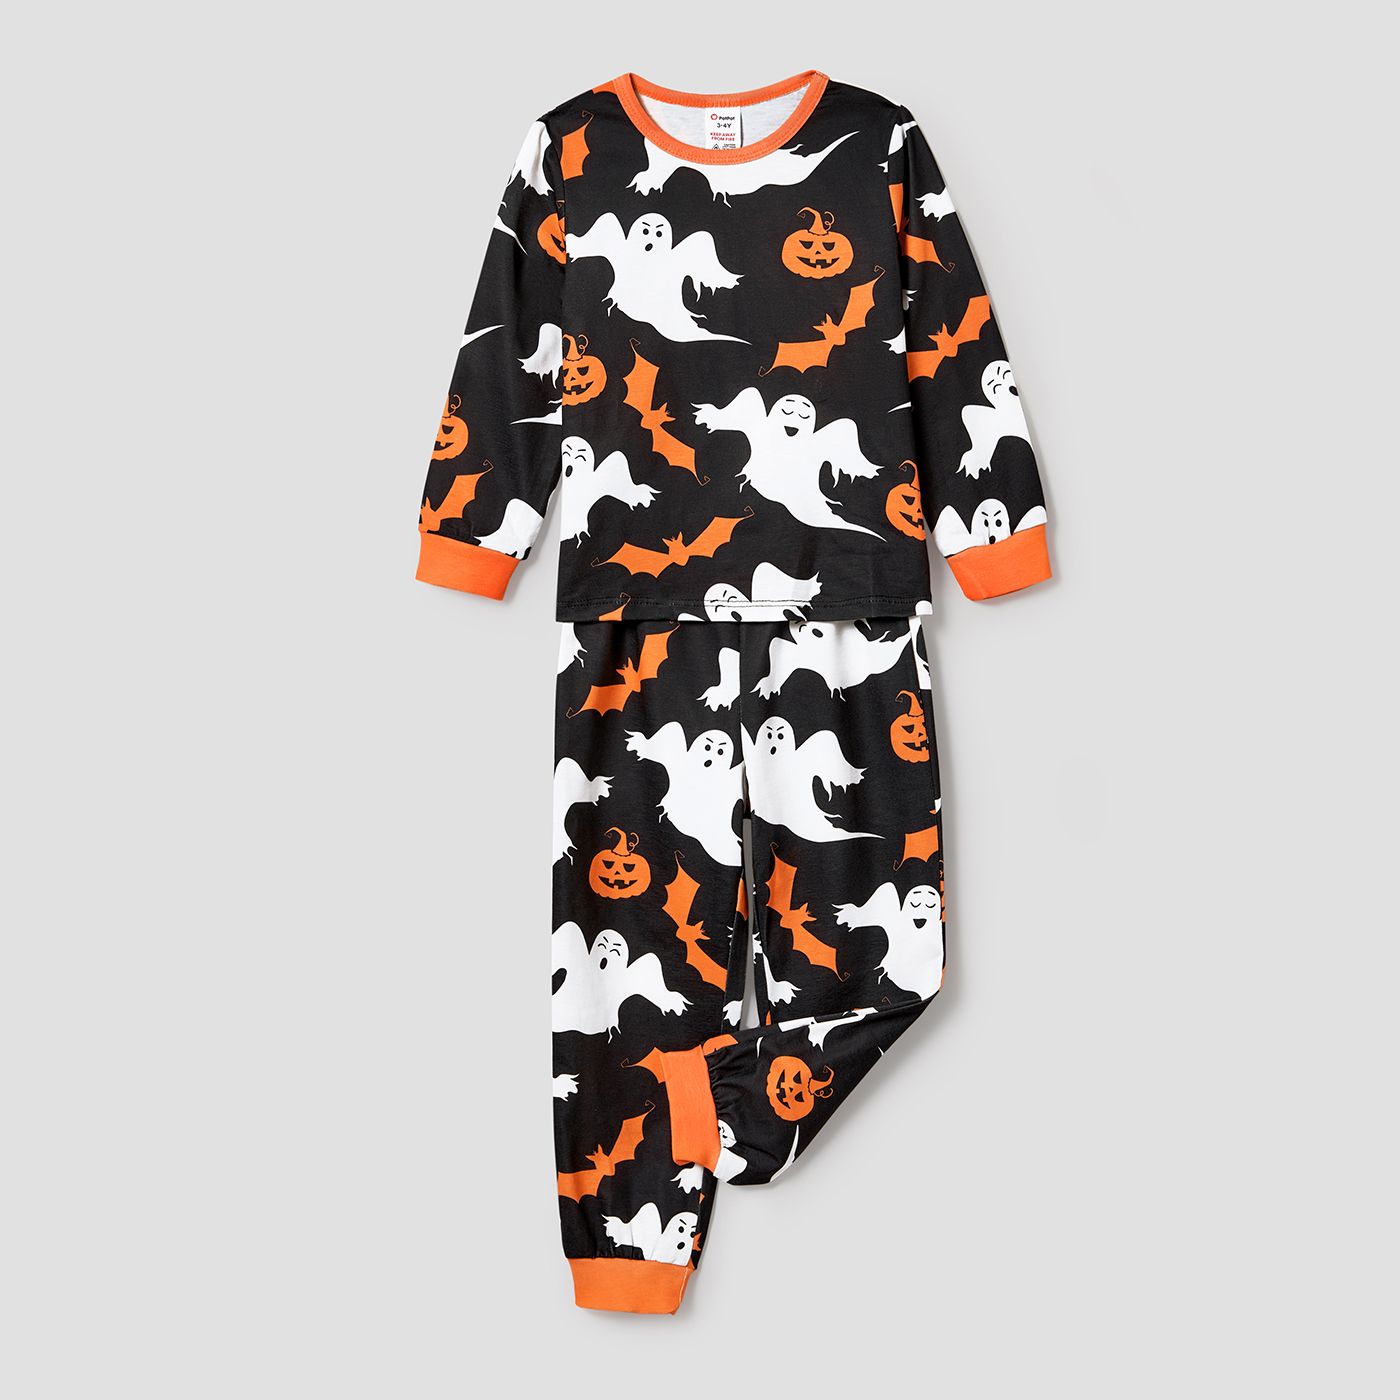 Halloween Family Matching Letter & Pumpkin Print Pajamas Sets (Flame Resistant)